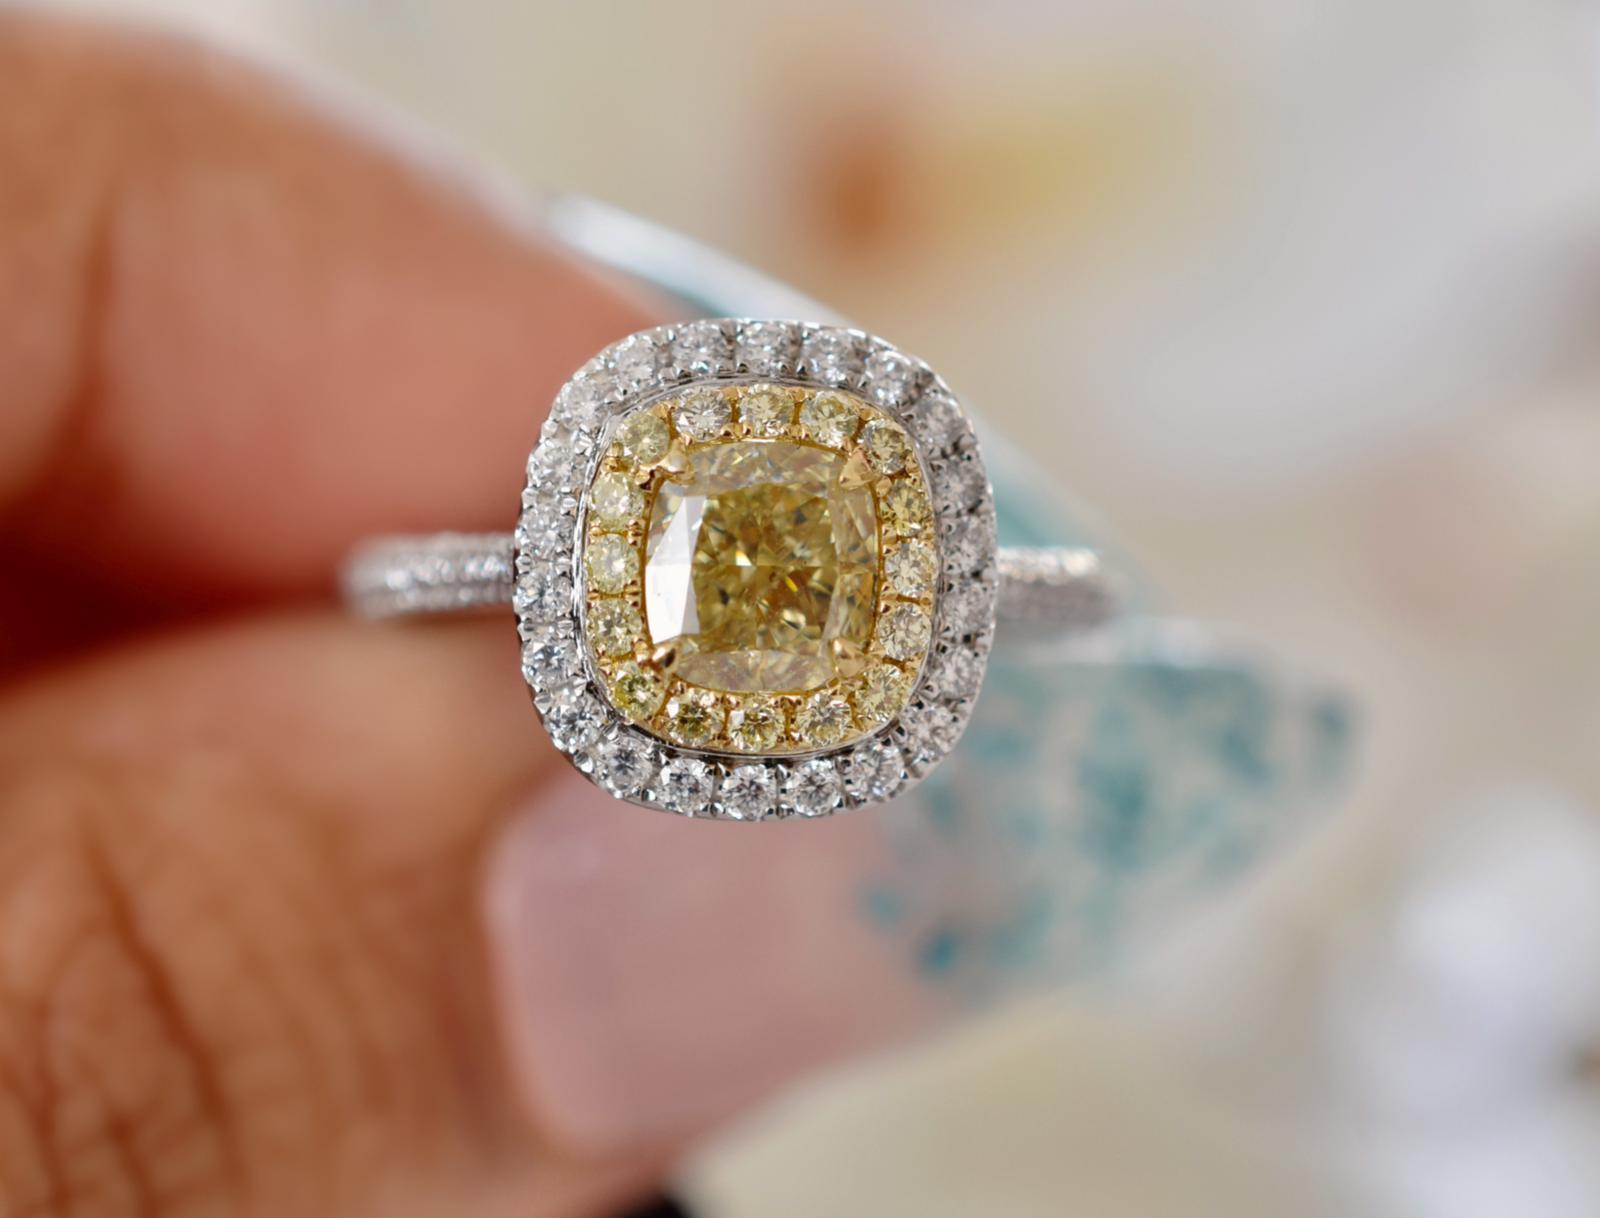 **100% NATURAL FANCY COLOUR DIAMOND JEWELLERIES**

✪ Jewelry Details ✪

♦ MAIN STONE DETAILS

➛ Stone Shape: Cushion
➛ Stone Color: Fancy Light Yellow
➛ Stone Weight: 0.91 carats
➛ GIA certified

♦ SIDE STONE DETAILS
  
➛ Side Yellow diamonds - 16